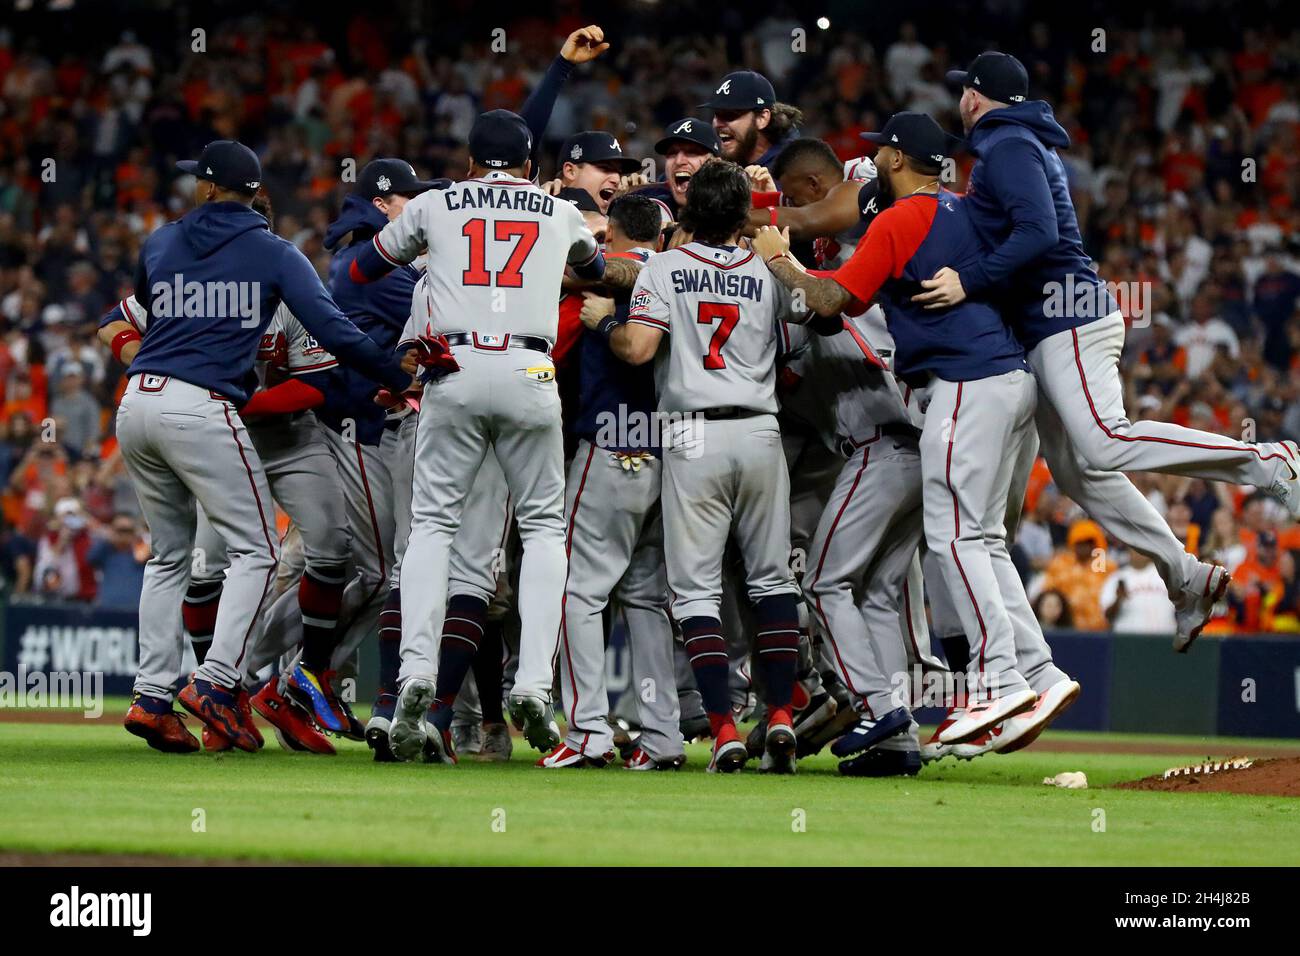 usa-03rd-nov-2021-atlanta-braves-players-celebrate-after-a-7-0-win-against-the-houston-astros-to-close-out-the-world-series-in-game-6-at-minute-maid-park-on-tuesday-nov-2-2021-in-houston-photo-by-curtis-comptonatlanta-journal-constitutionssipa-usa-credit-sipa-usalamy-live-news-2H4J82B.jpg